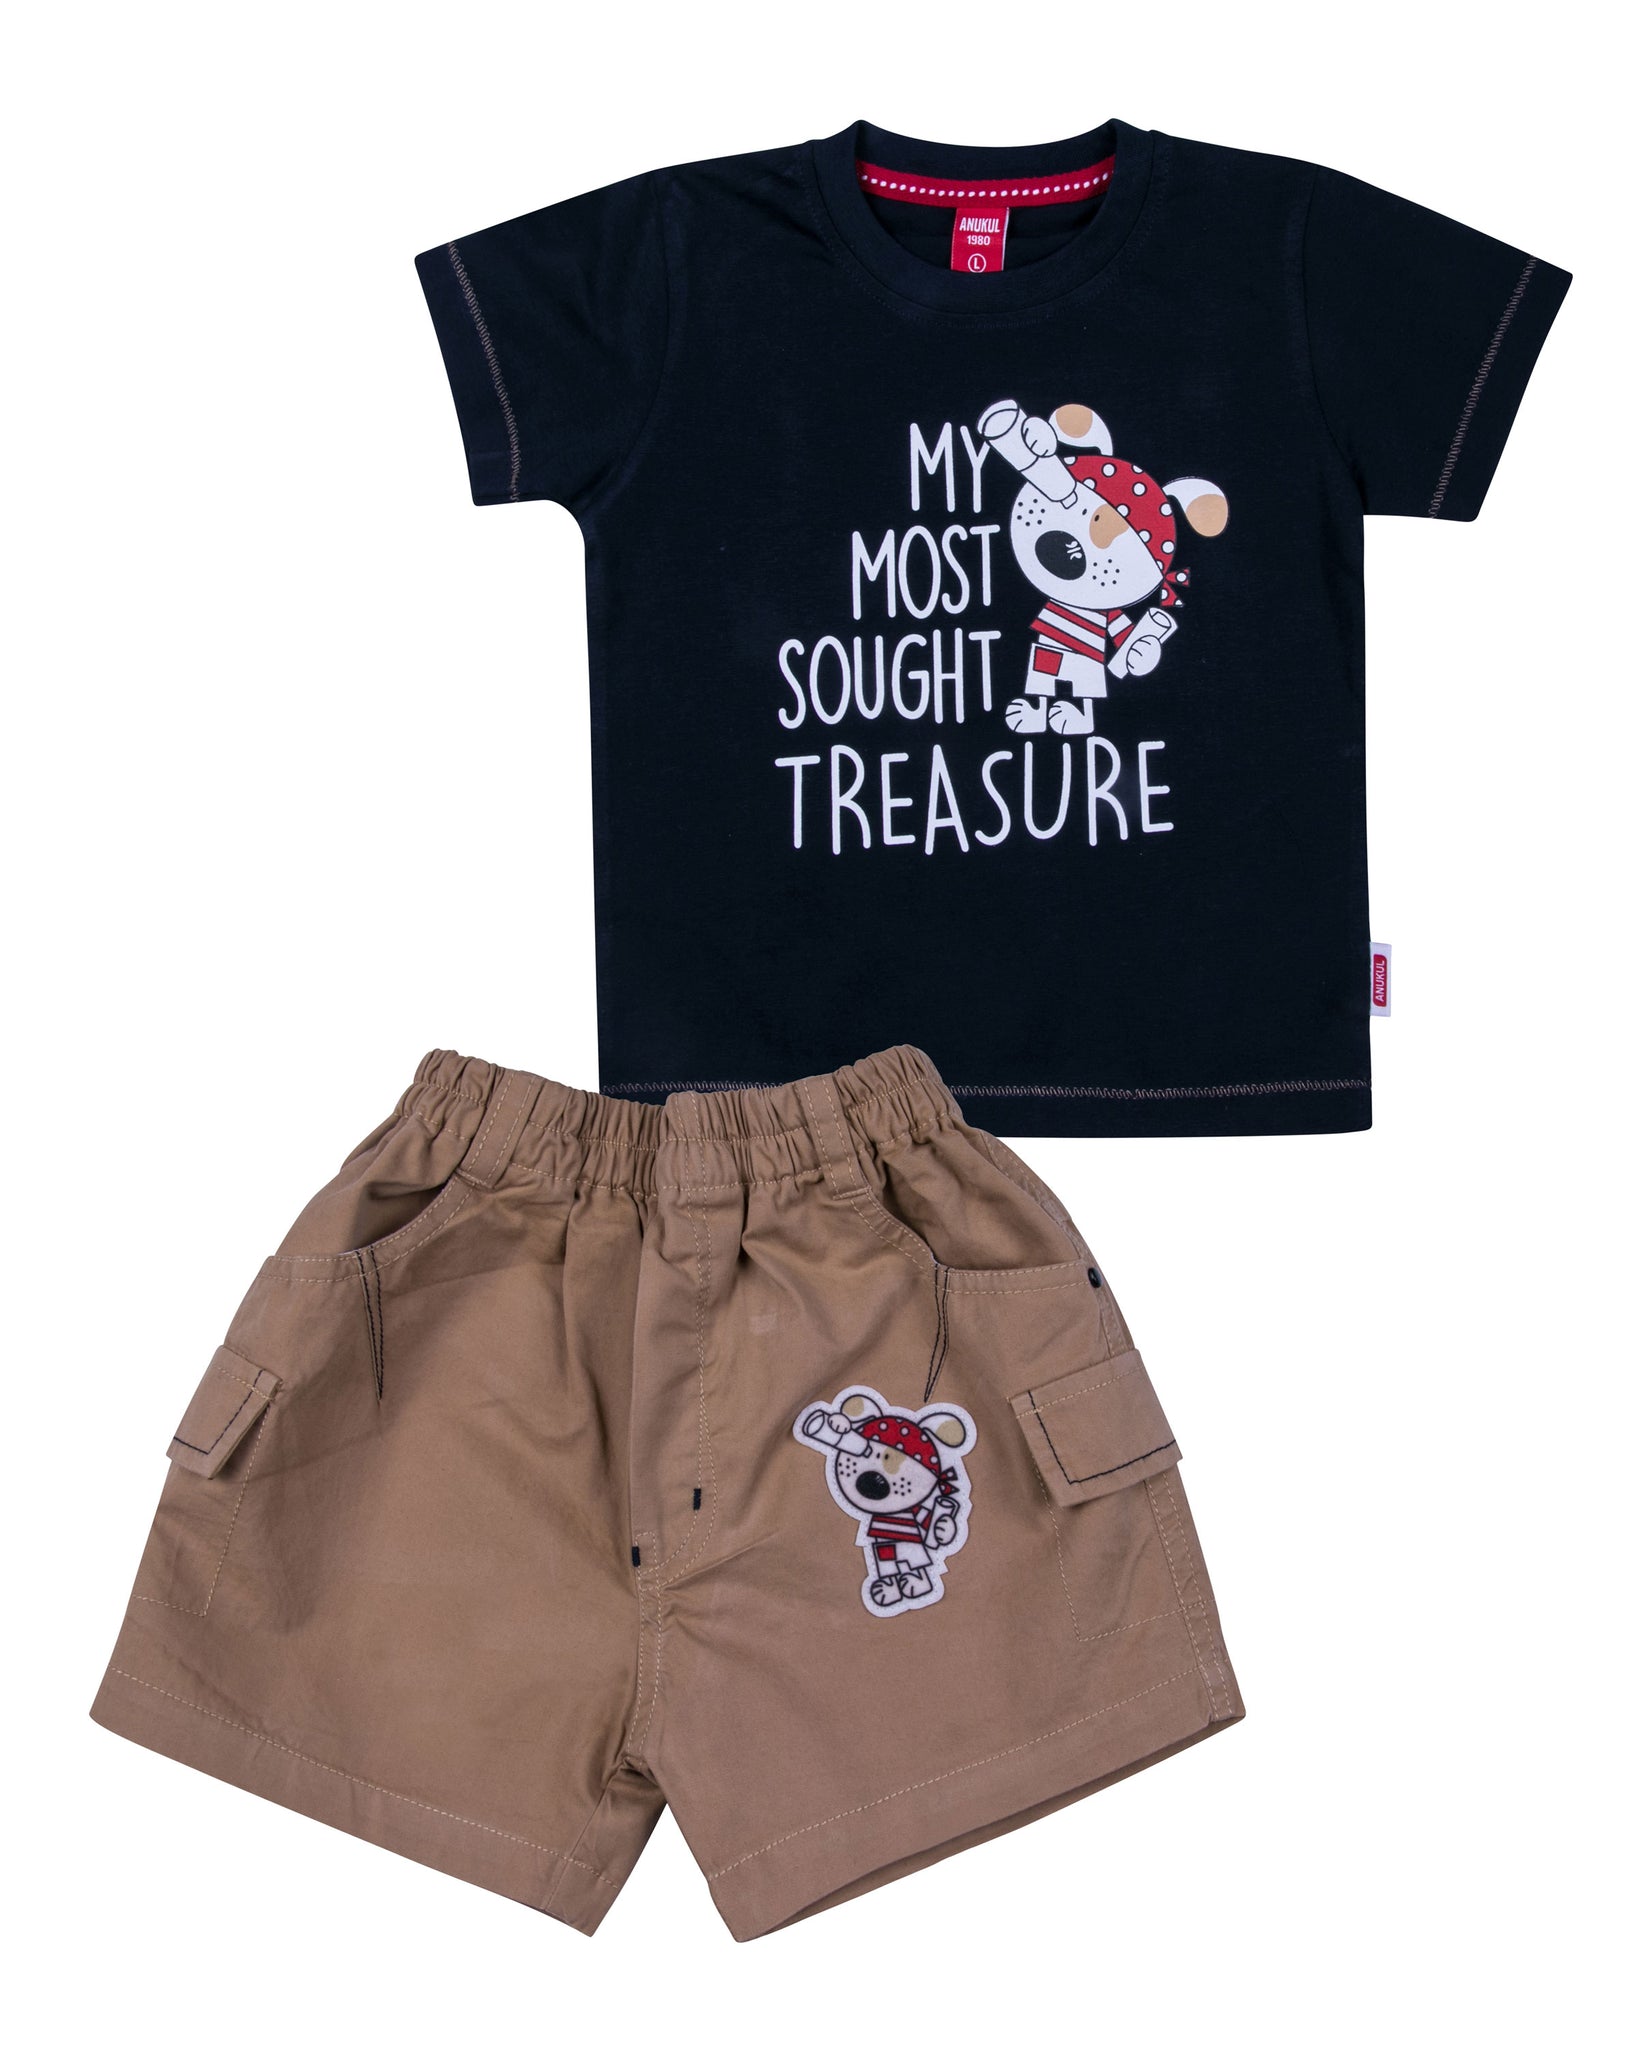 Baba Suit Collection | Kids outfits, Clothes, Apparel